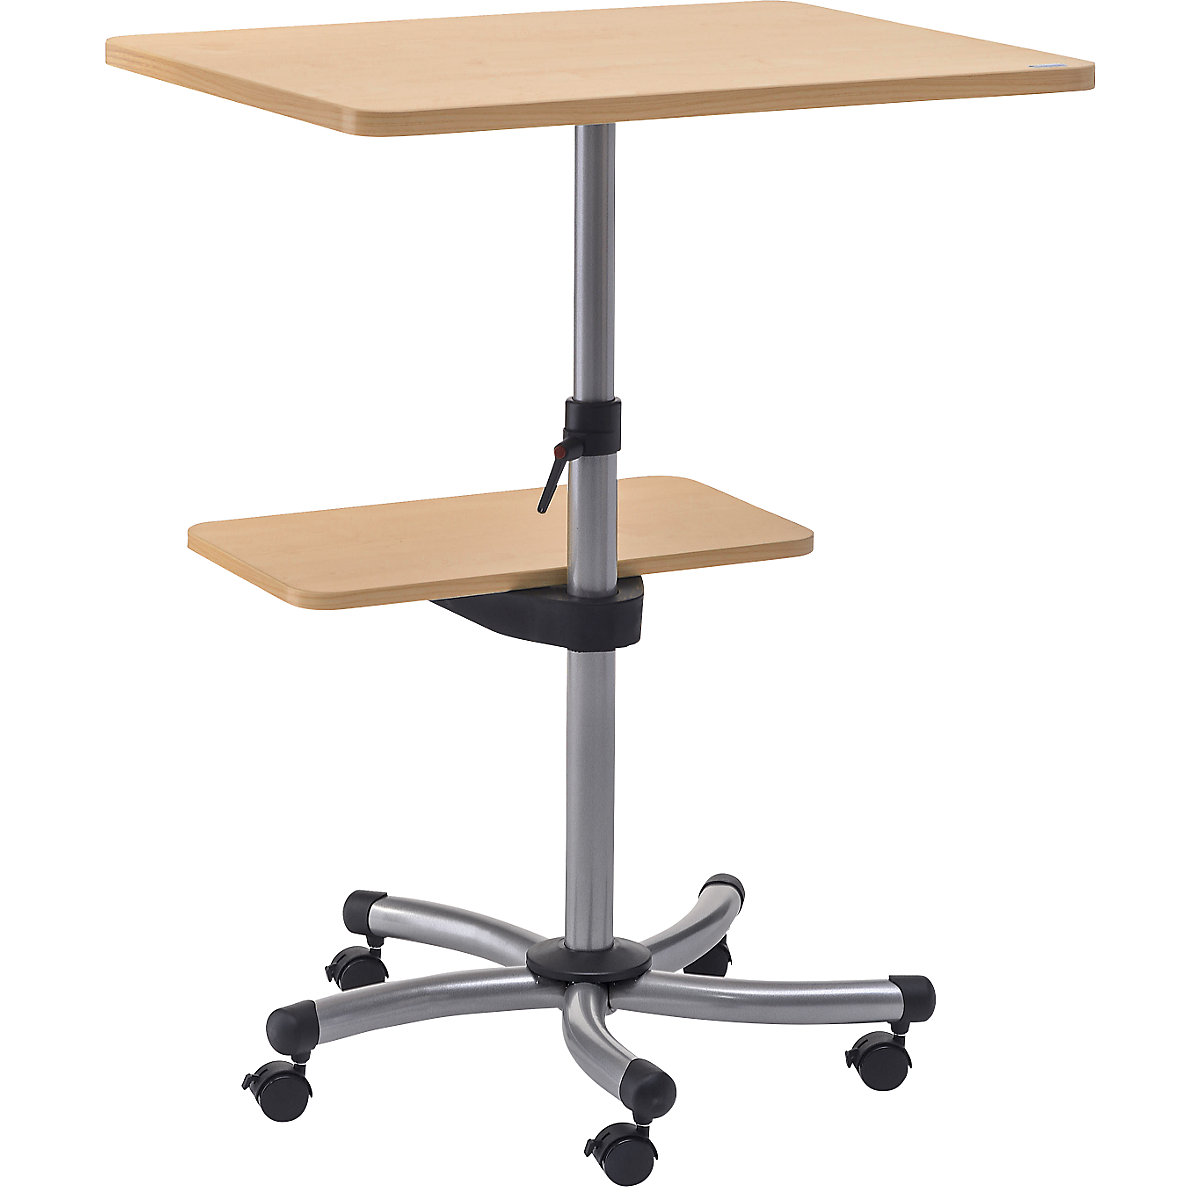 Multi-purpose table, overall height 720 – 1120 mm, top in beech finish-5